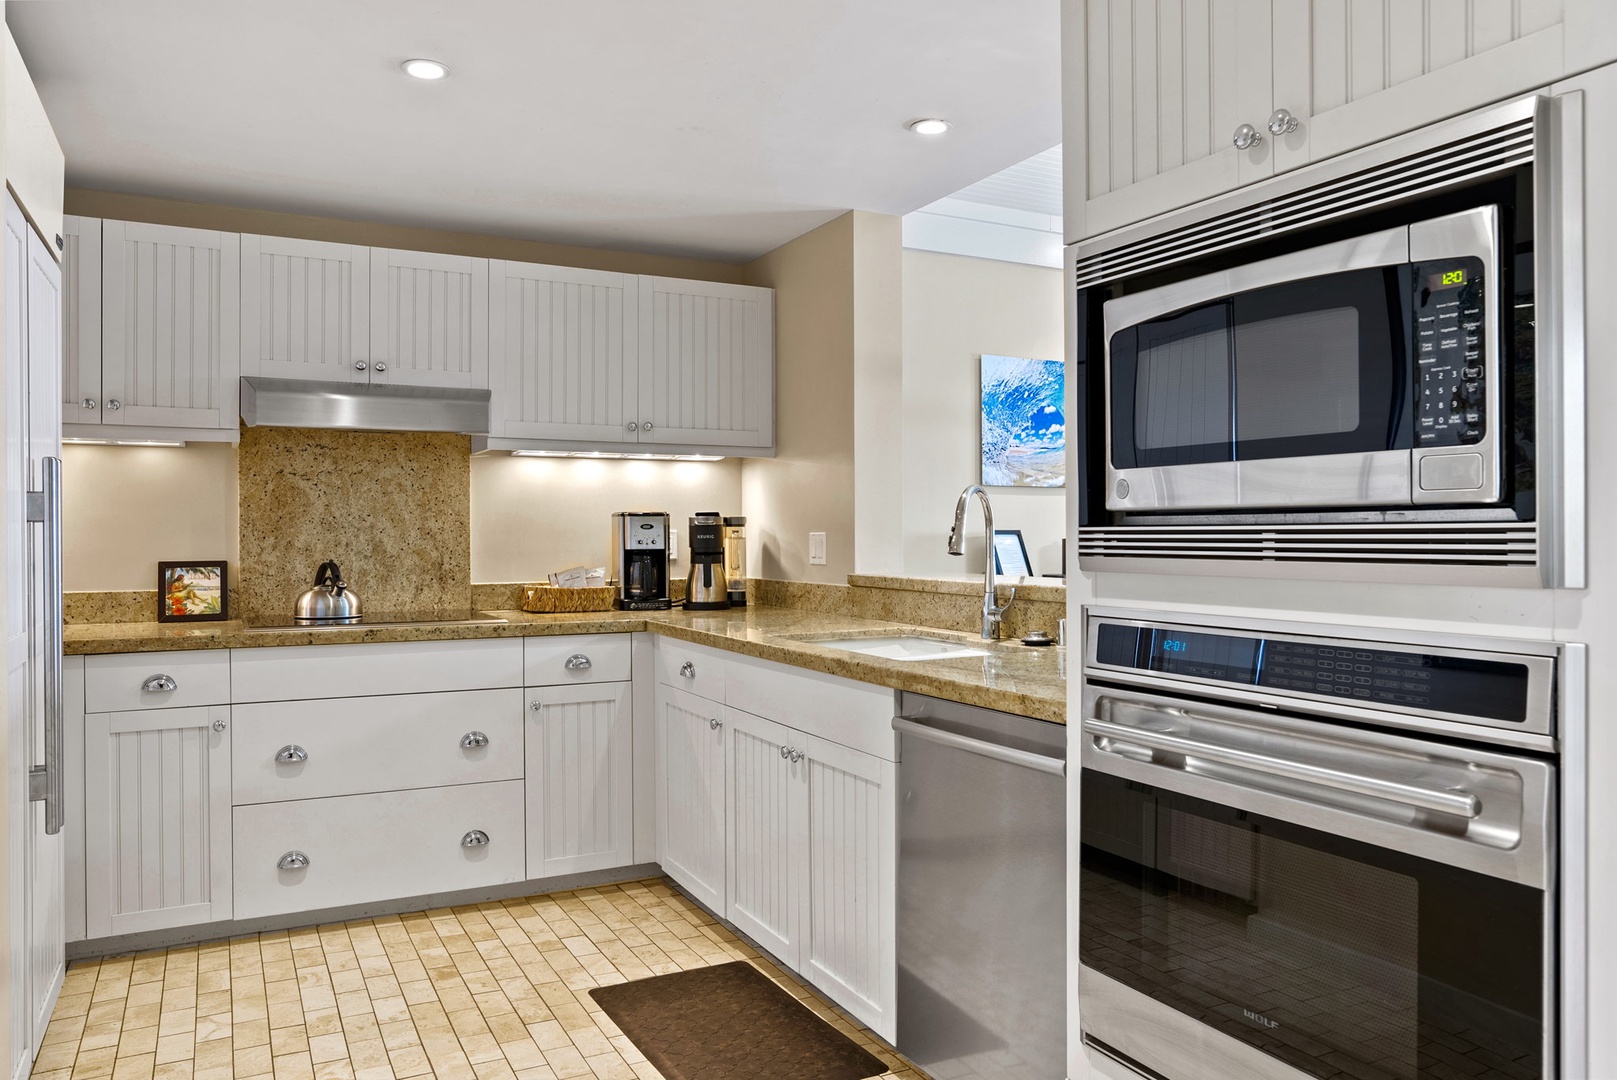 Kahuku Vacation Rentals, Turtle Bay Villas 307 - The kitchen is fully equipped with everything you might need during your stay